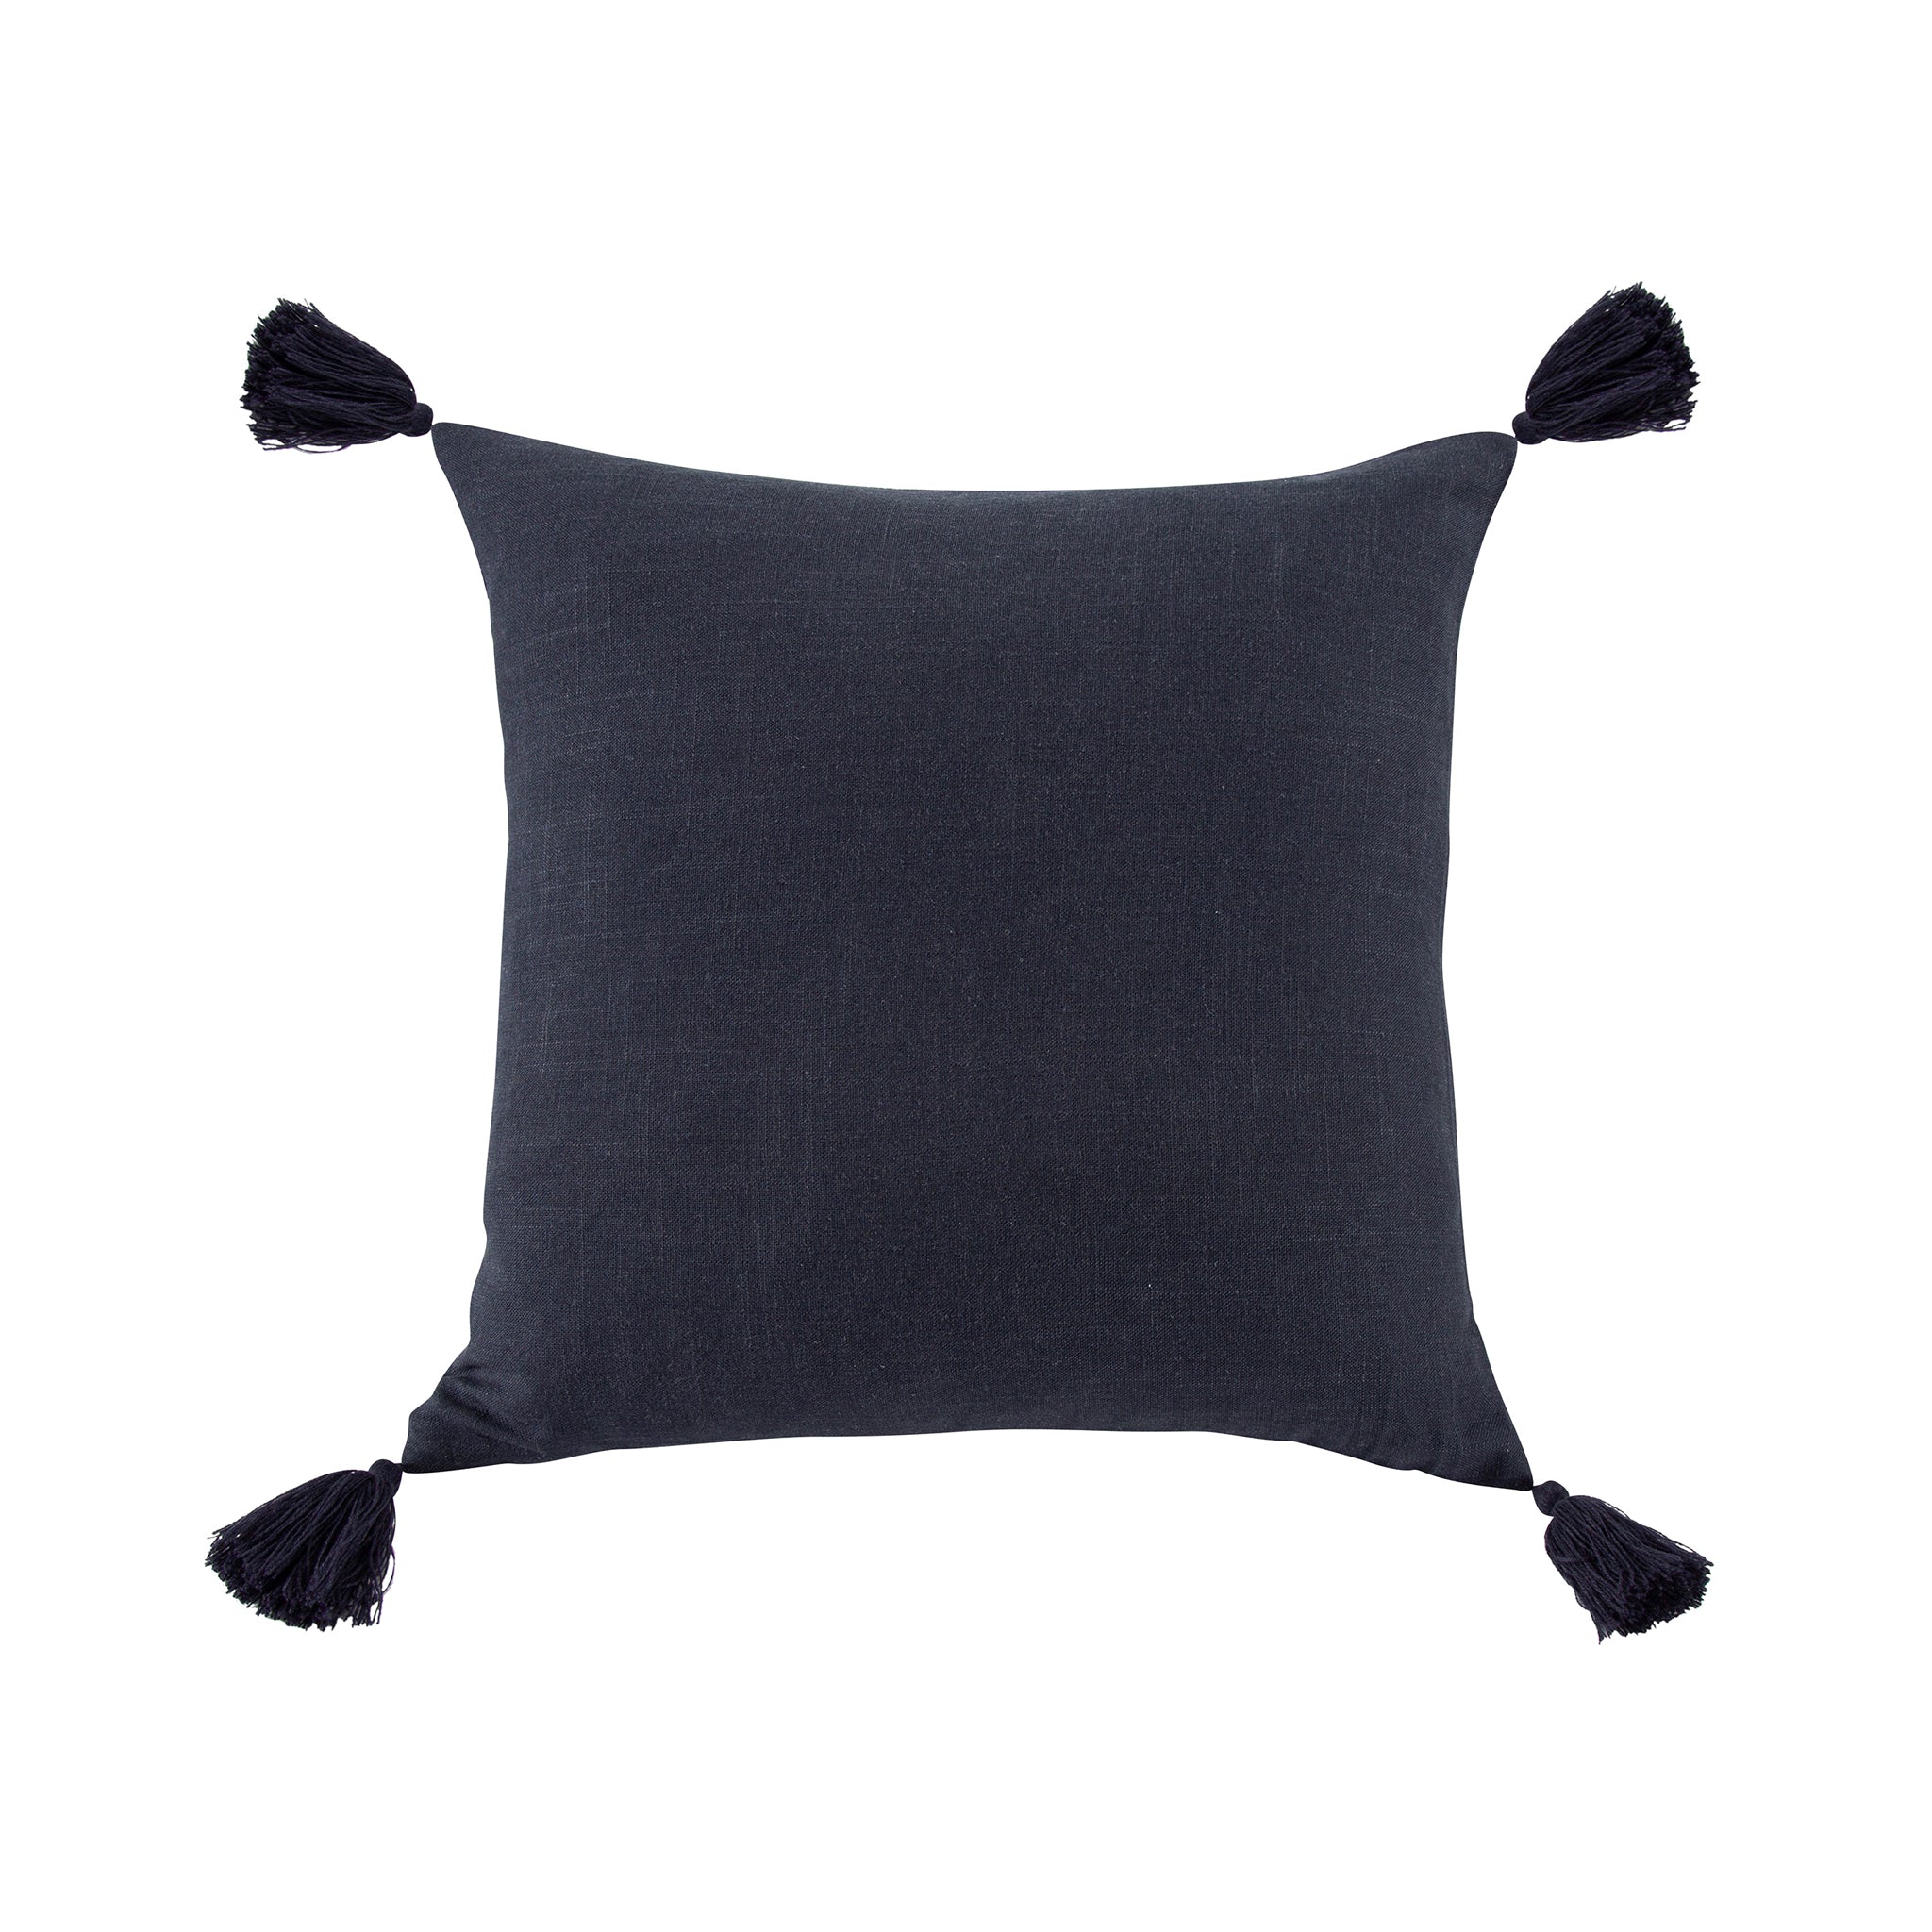 Clare Square Pillow